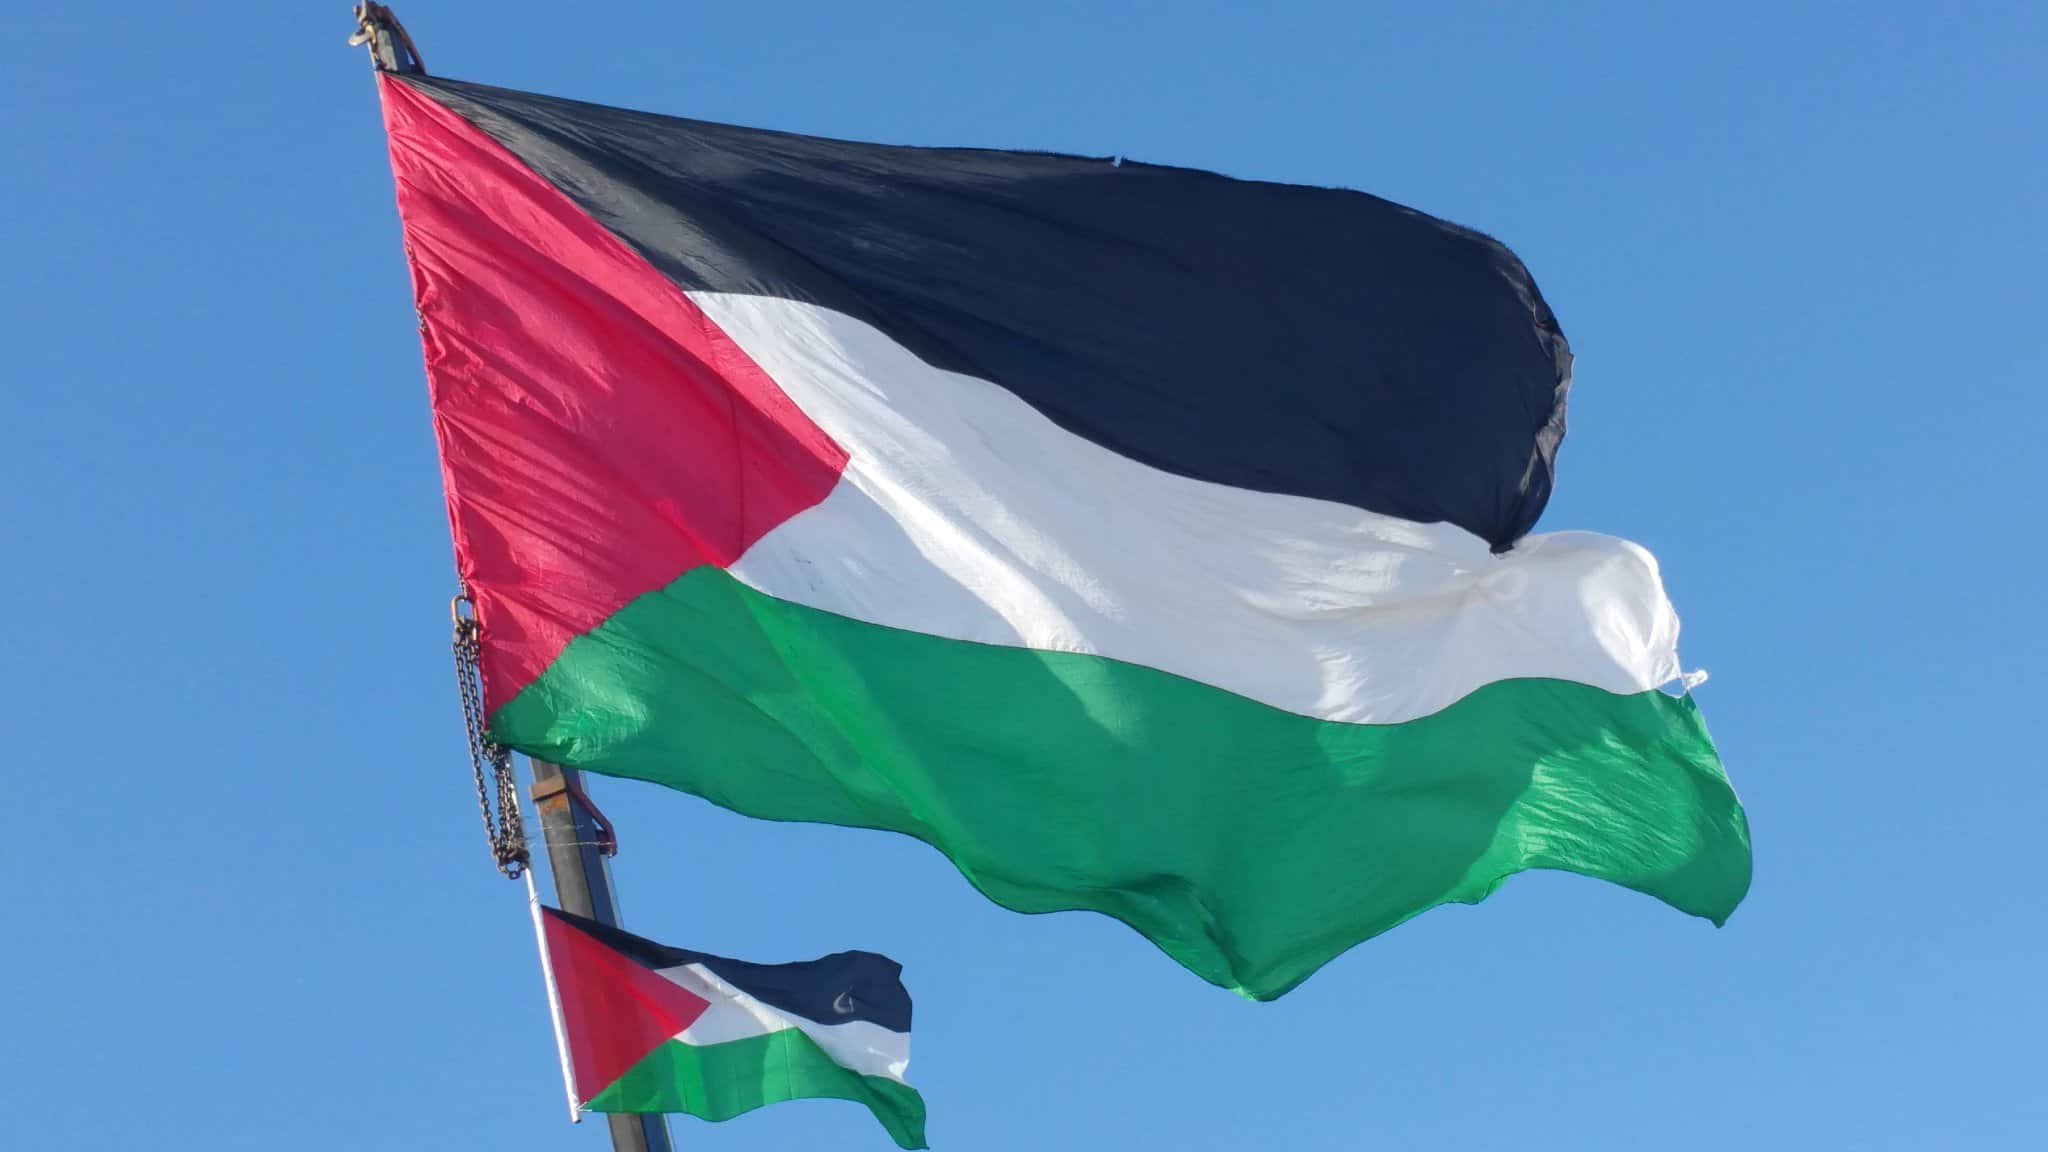 The flag of Palestine, seen close up, waves in the breeze.